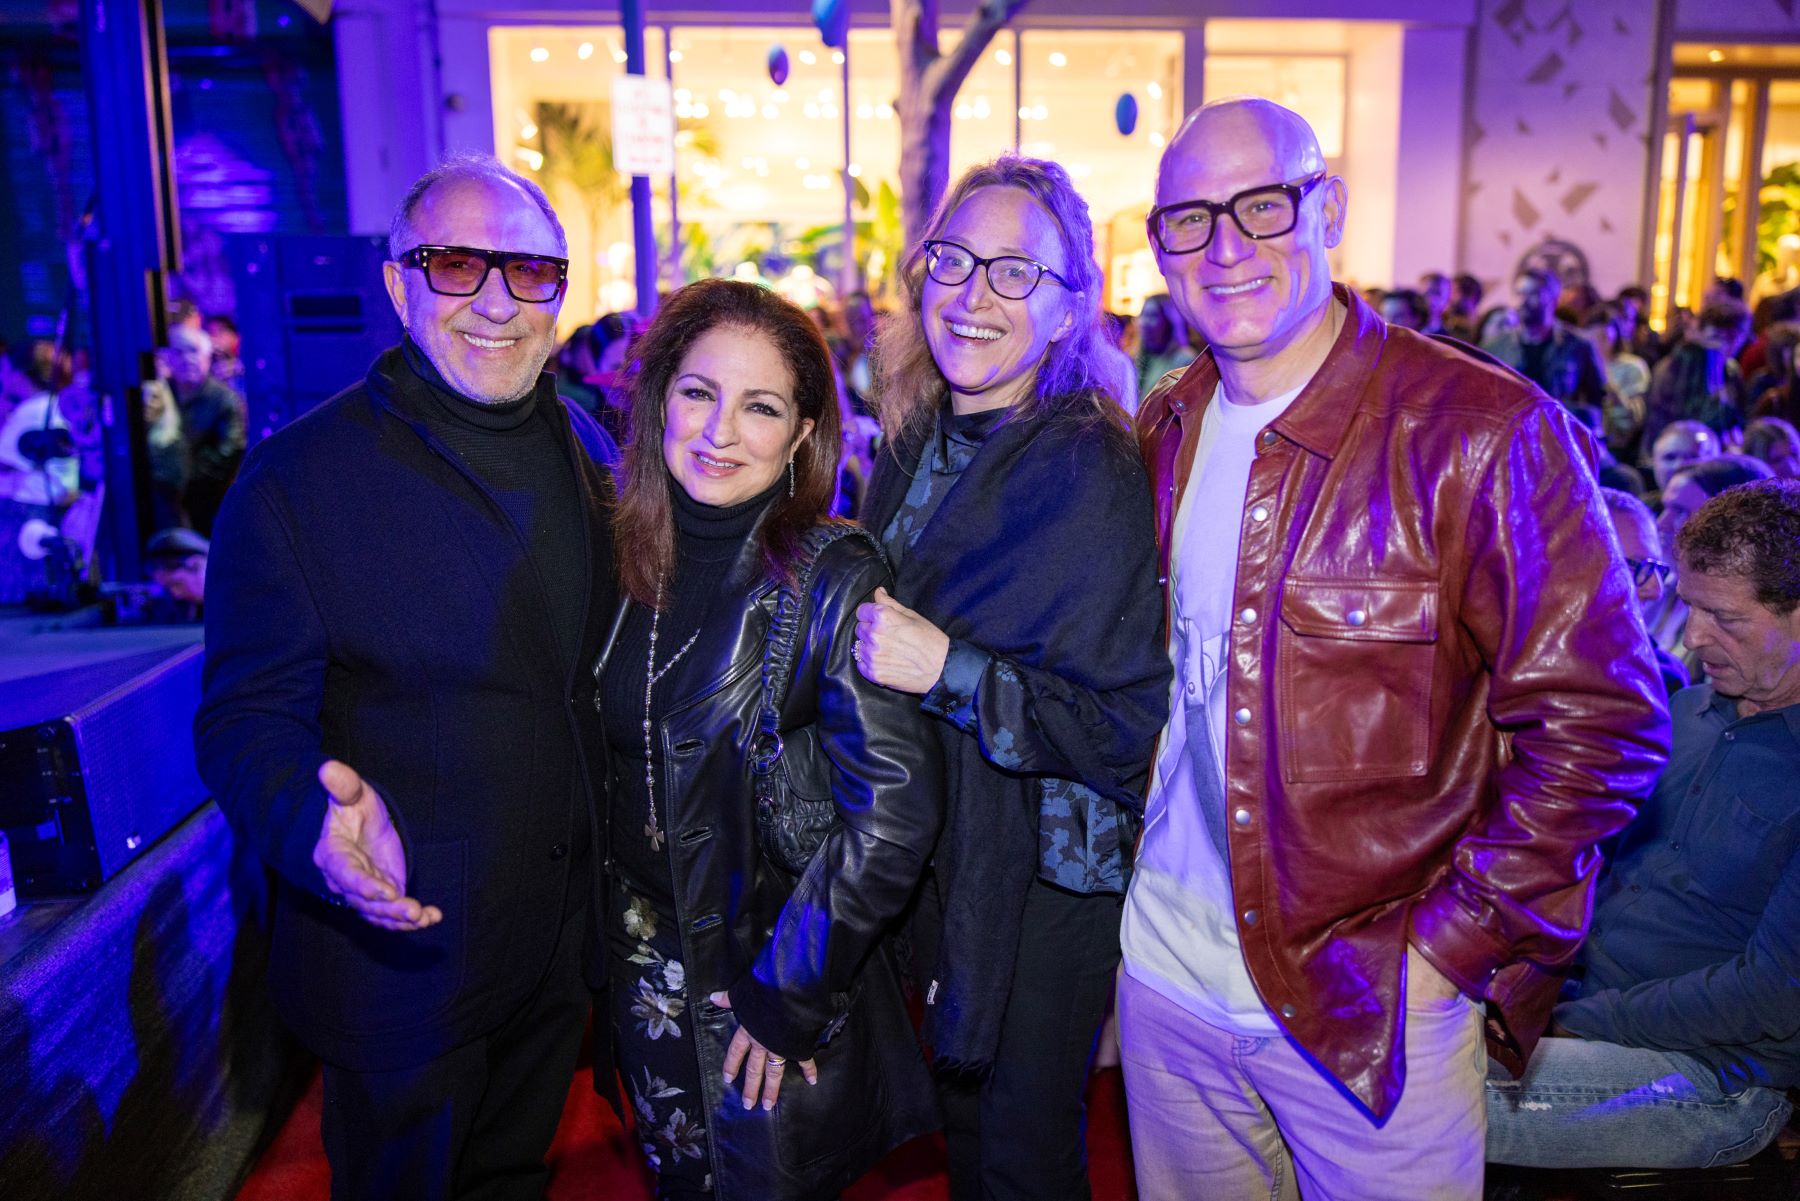 Miami Design District Hosts Spectacular Open-Air Symphony Concert Produced by Legendary Emilio Estefan in Collaboration with the Miami Symphony